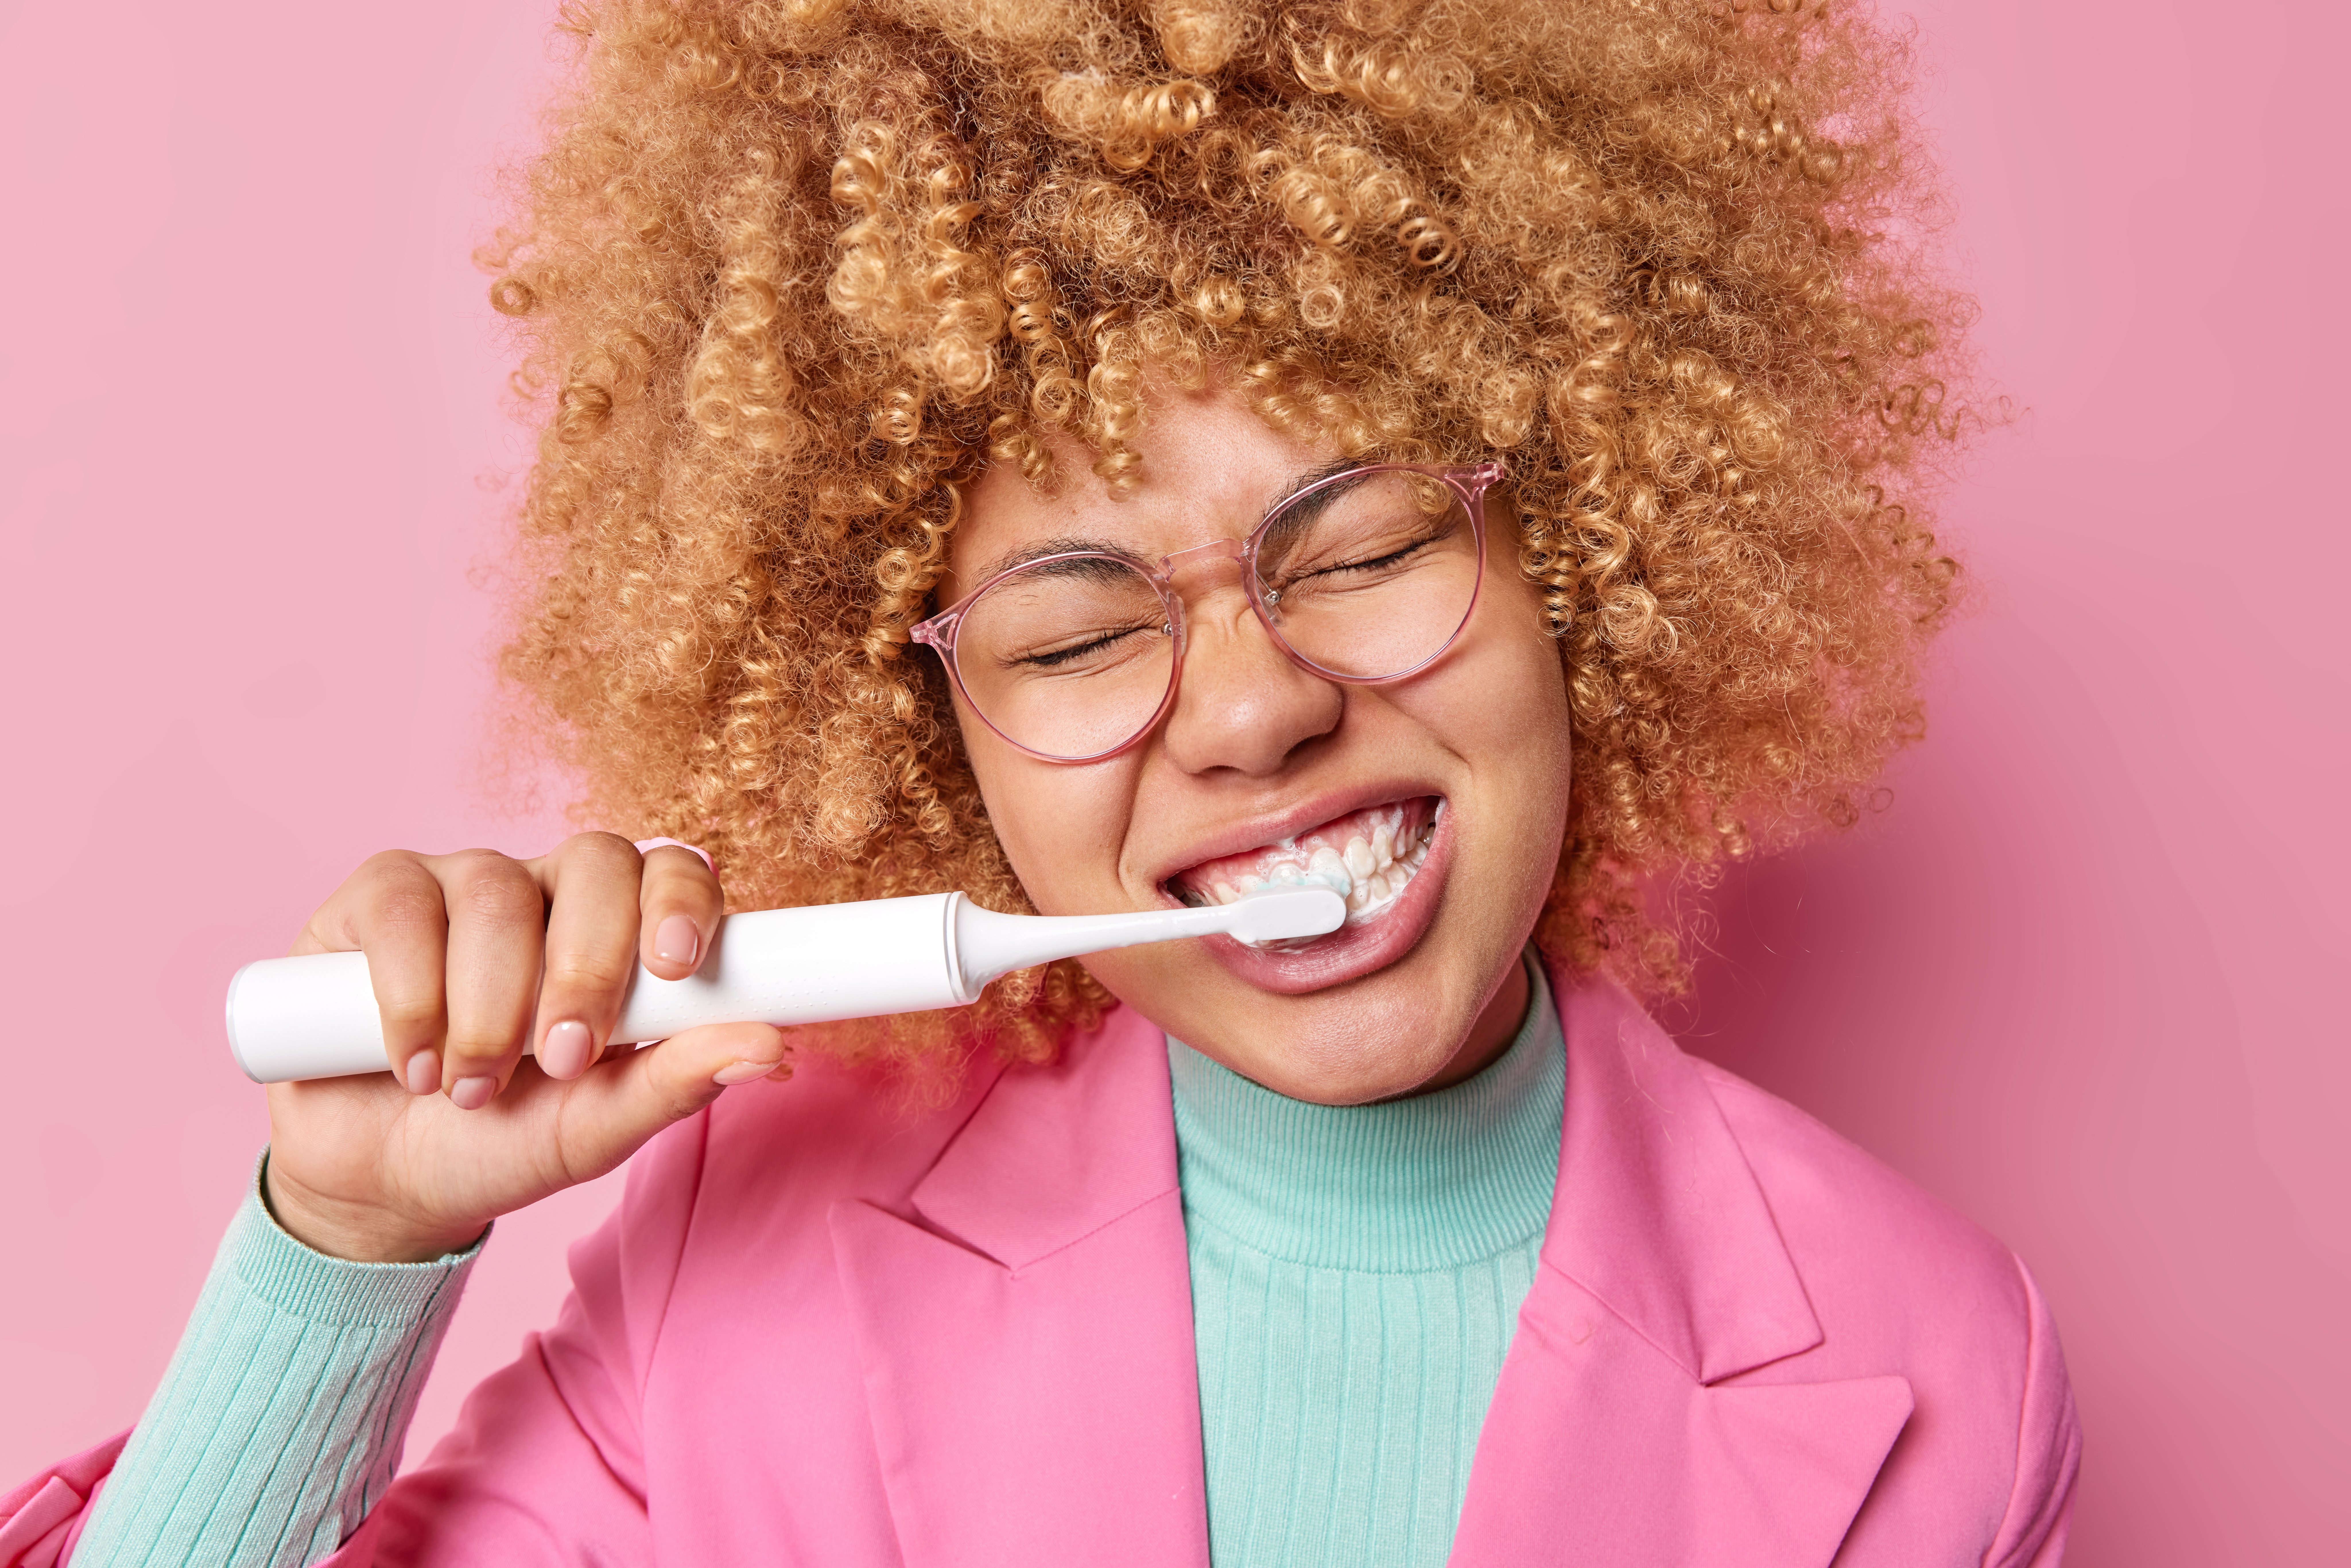 Woman brushing her teeth in a pink jacket